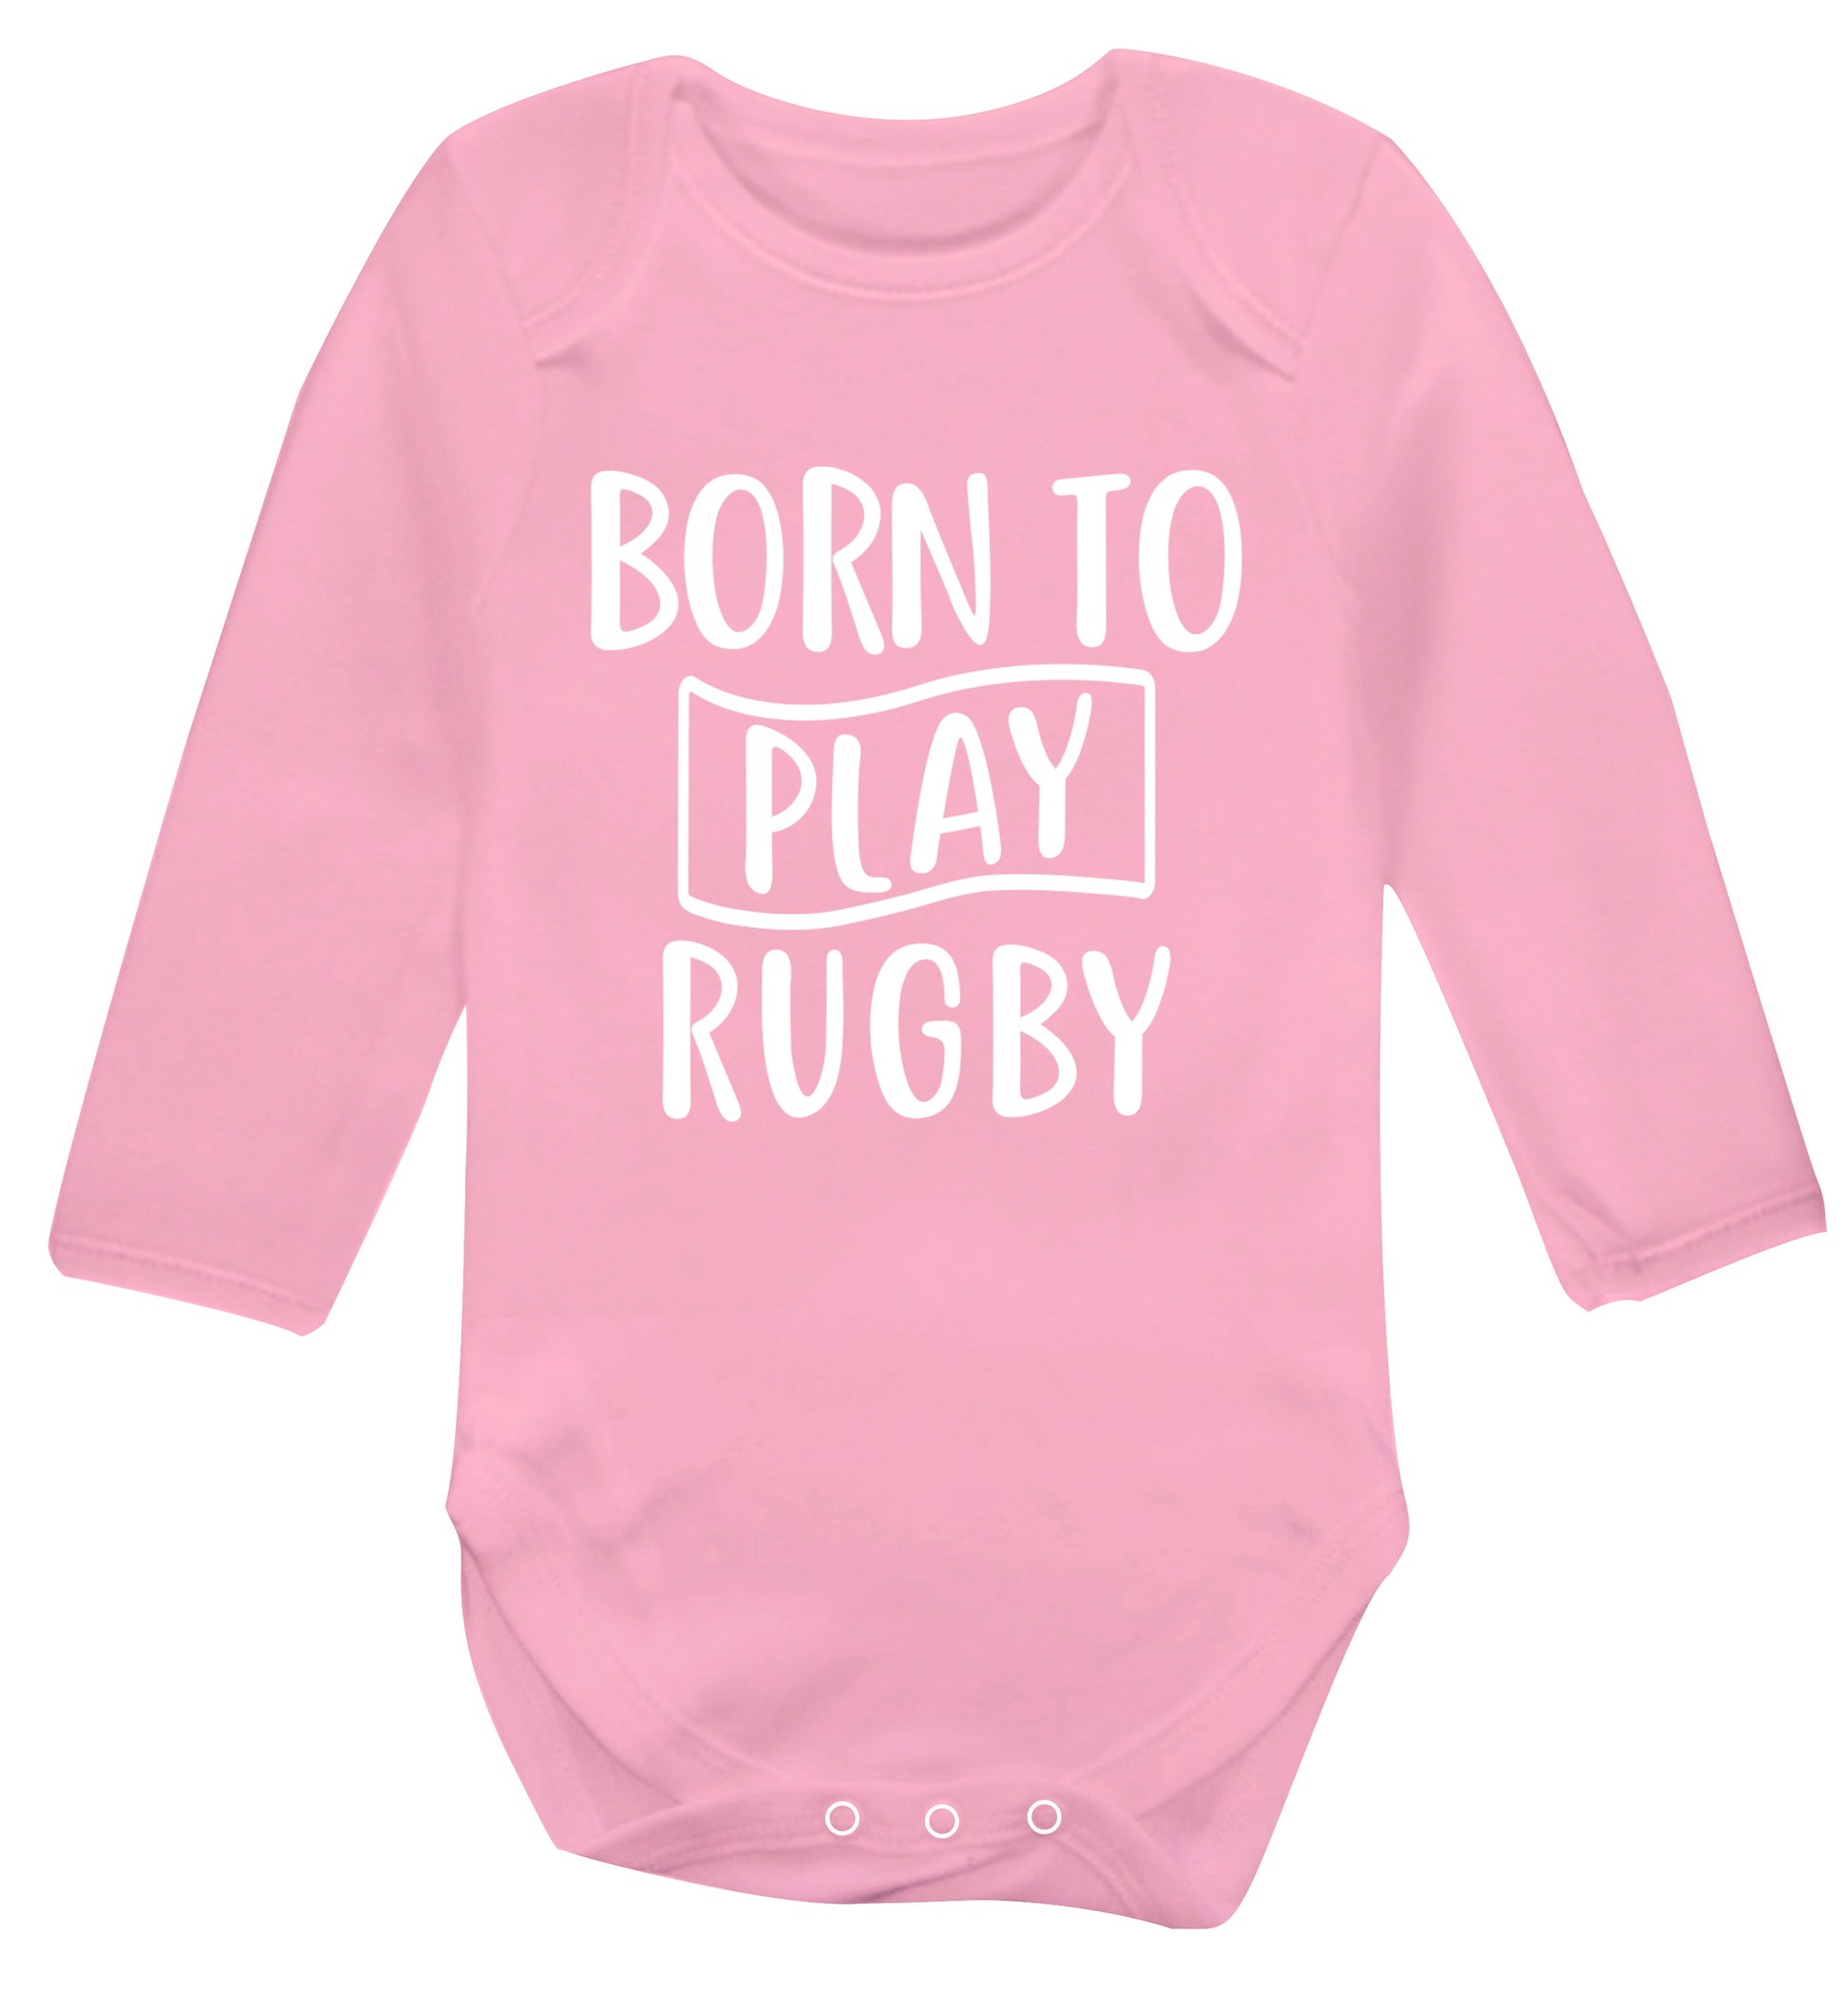 Born to play rugby Baby Vest long sleeved pale pink 6-12 months